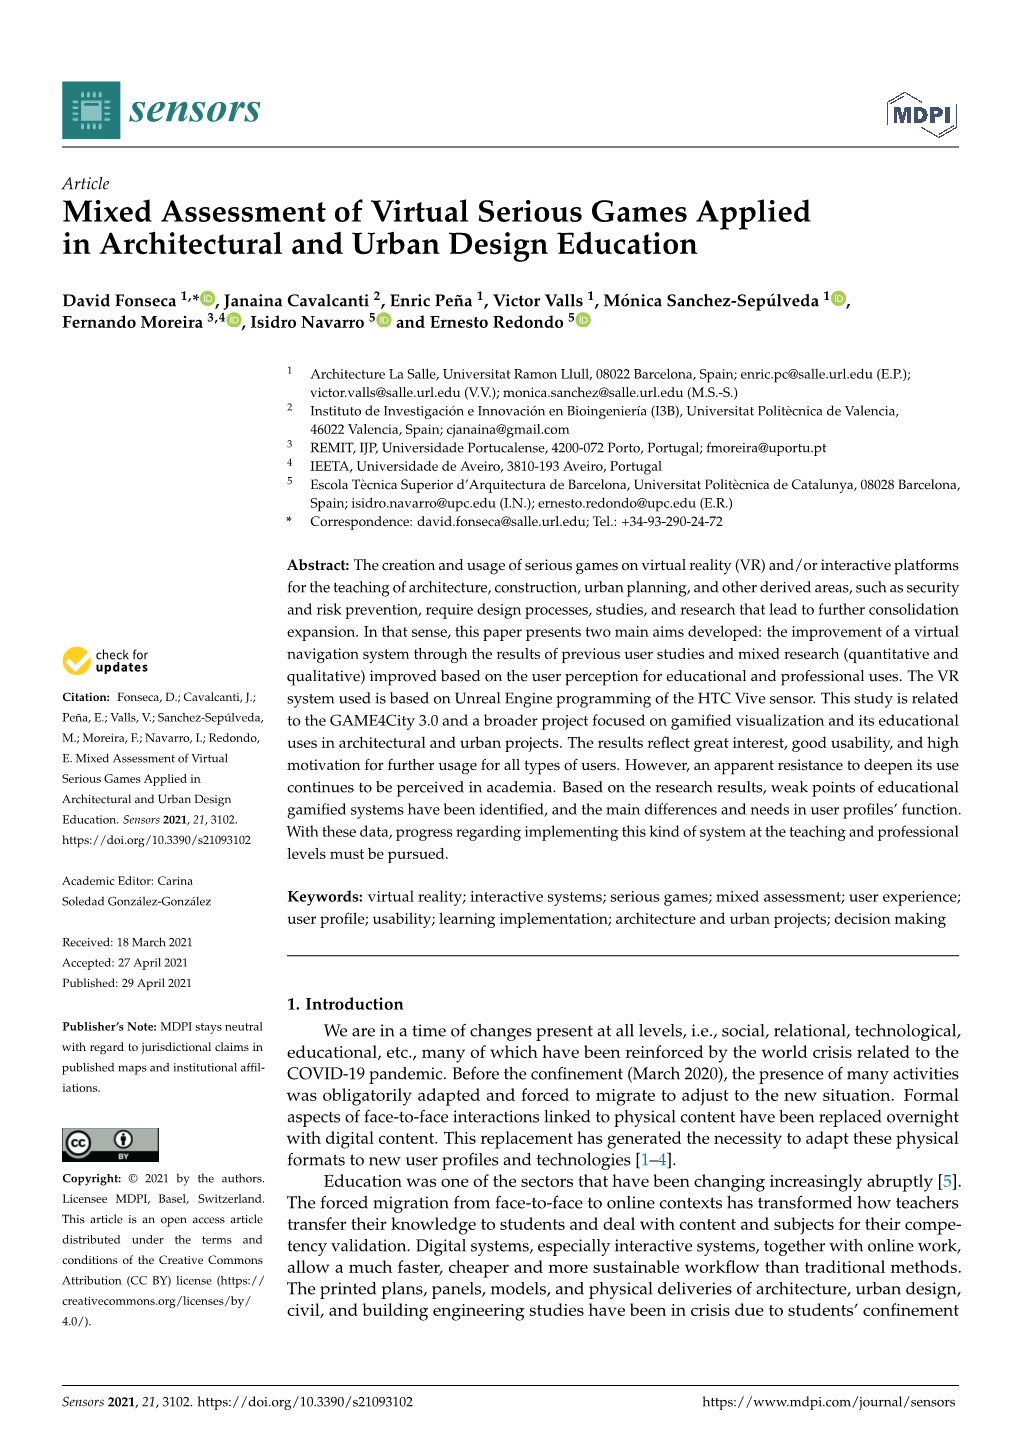 Mixed Assessment of Virtual Serious Games Applied in Architectural and Urban Design Education